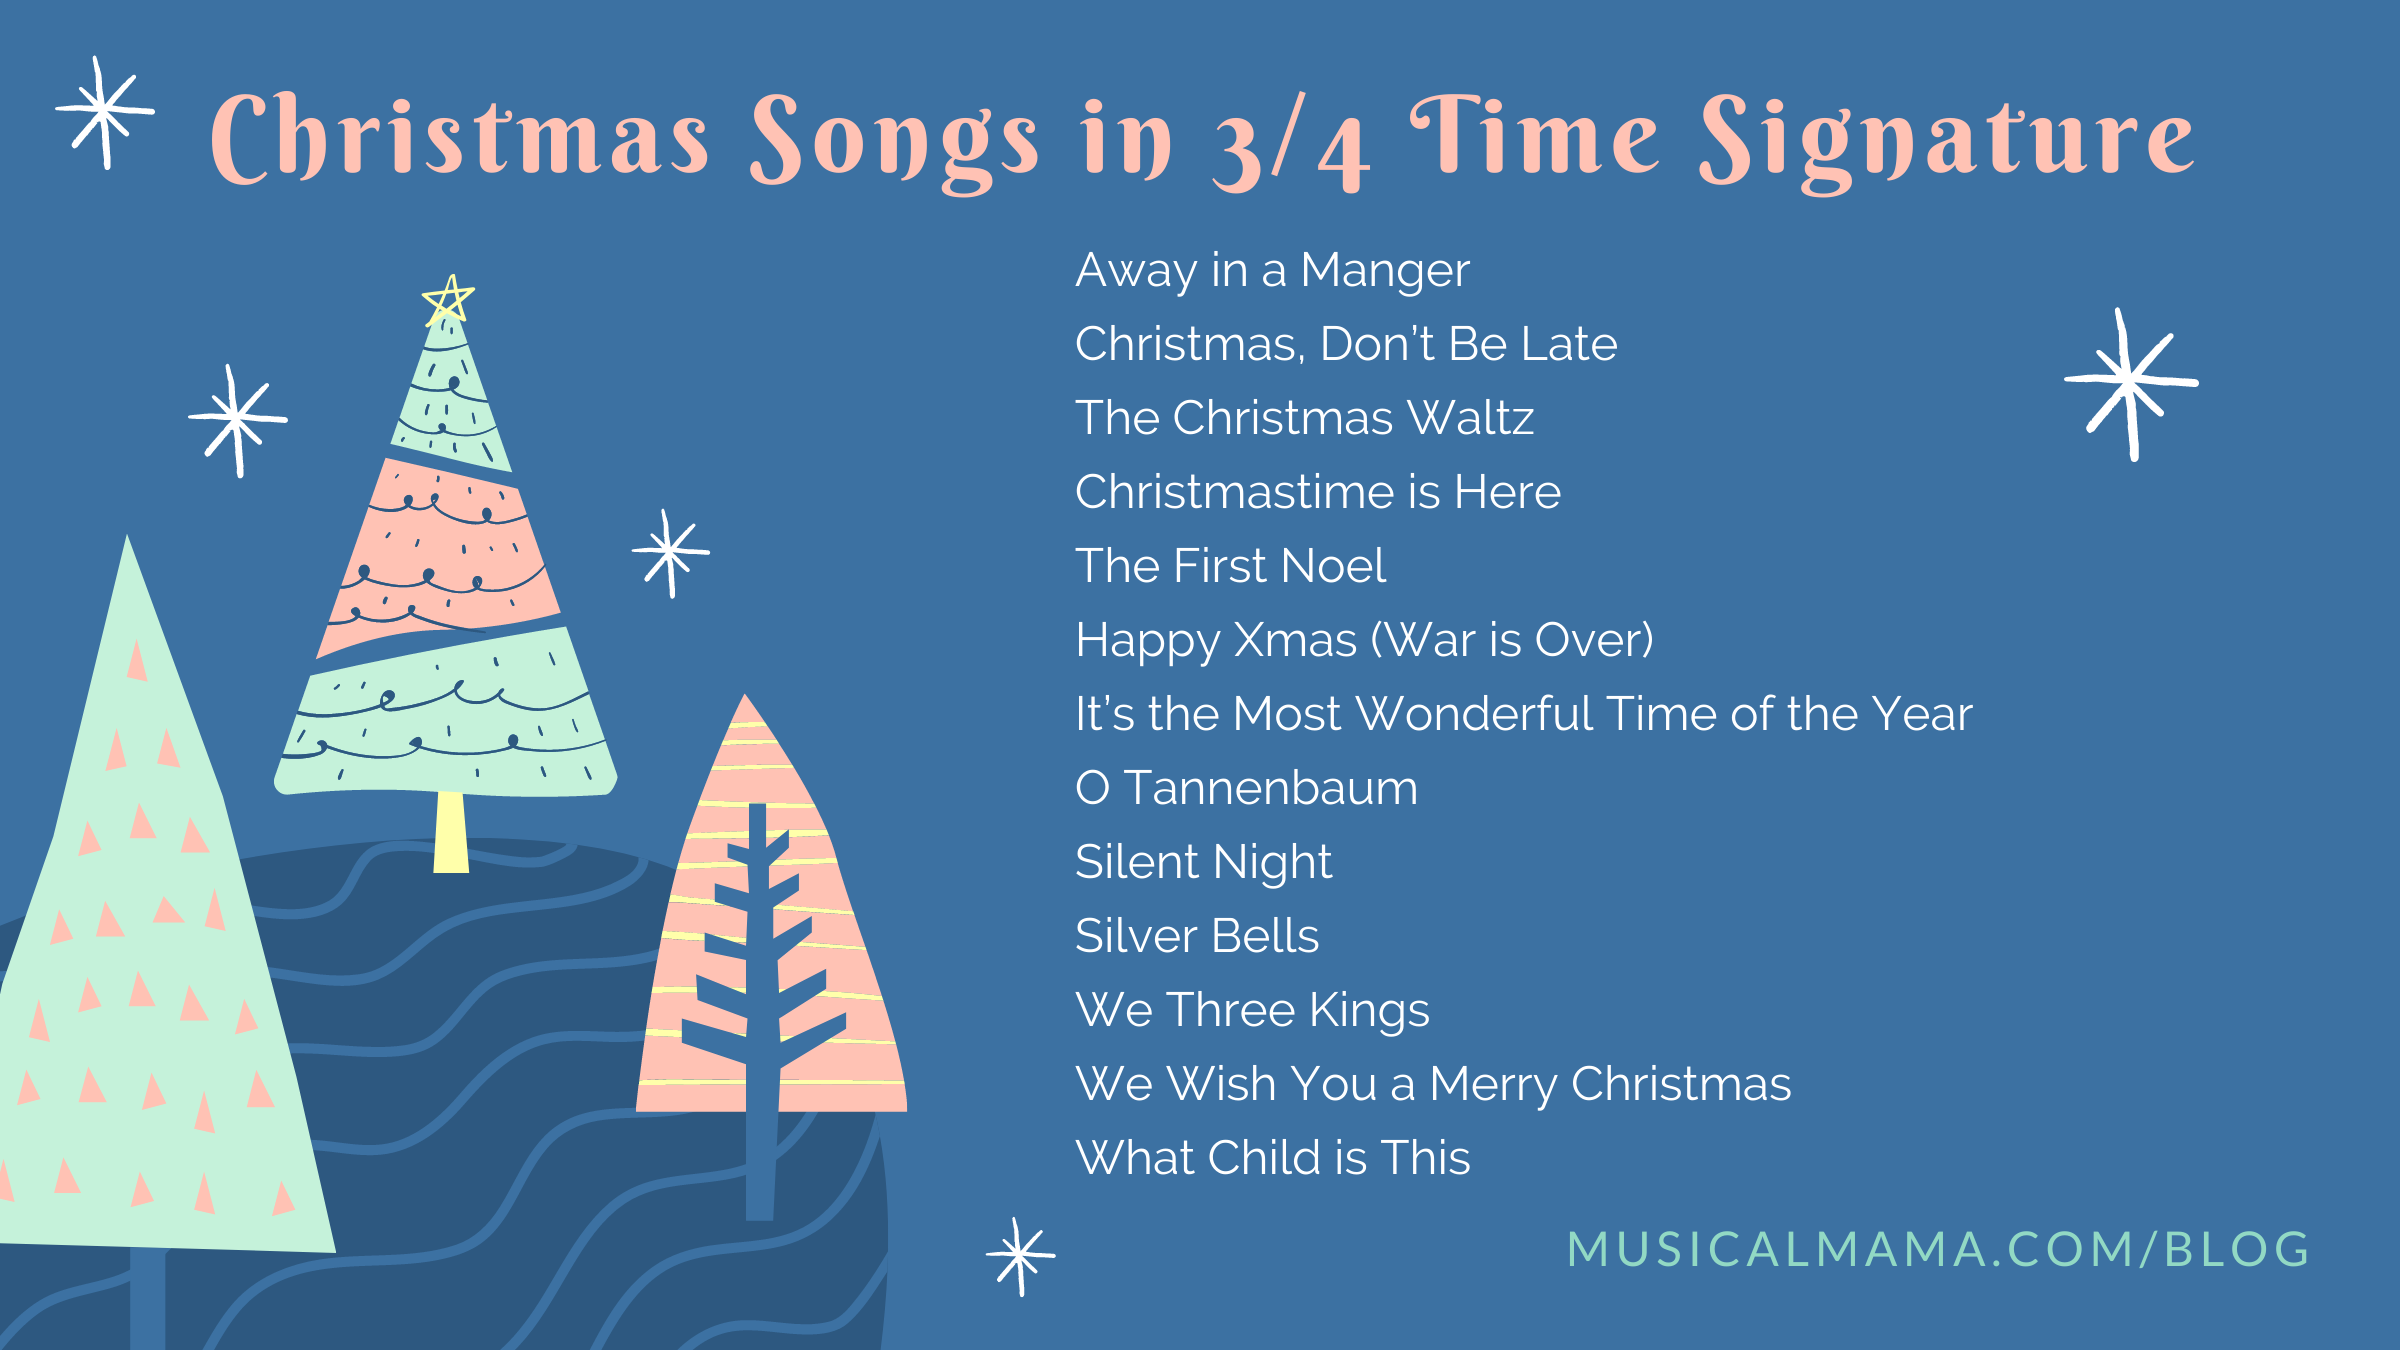 A List of Christmas Songs Set in 3/4 Time Signature — Musical Mama